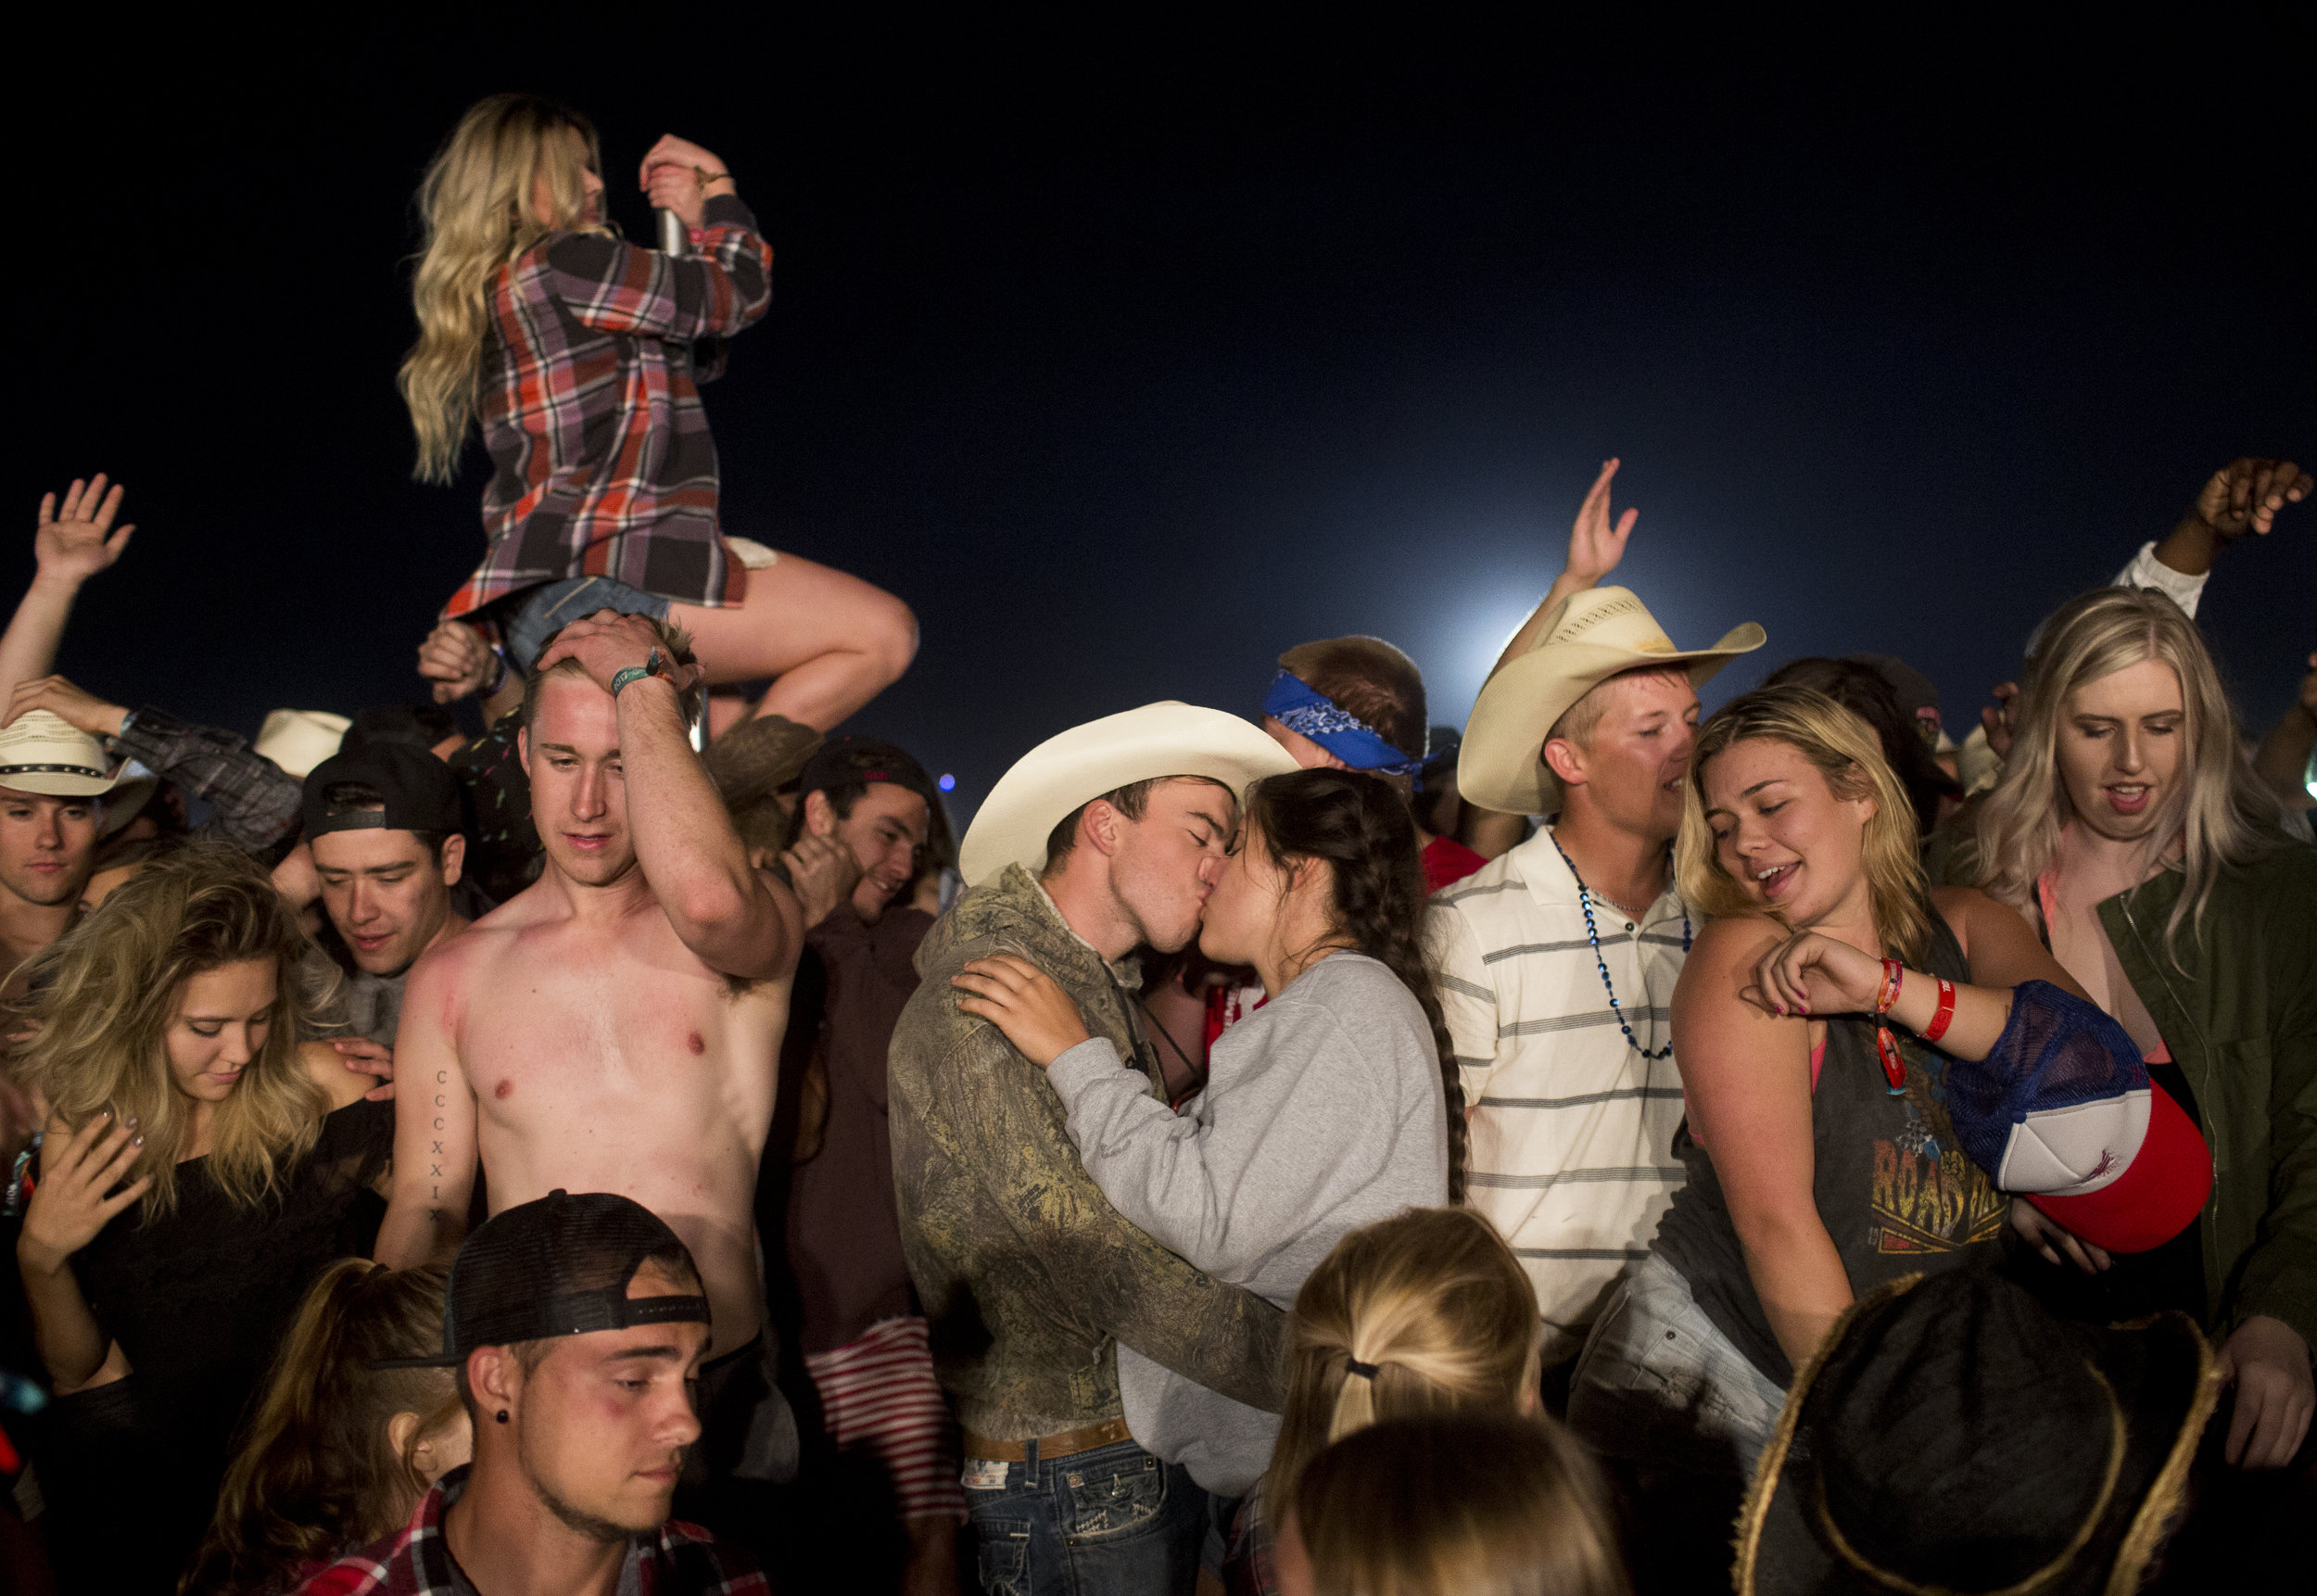  Festival-goers party in the after hours at the Country Thunder Music Festival, in Florence, Ariz.  